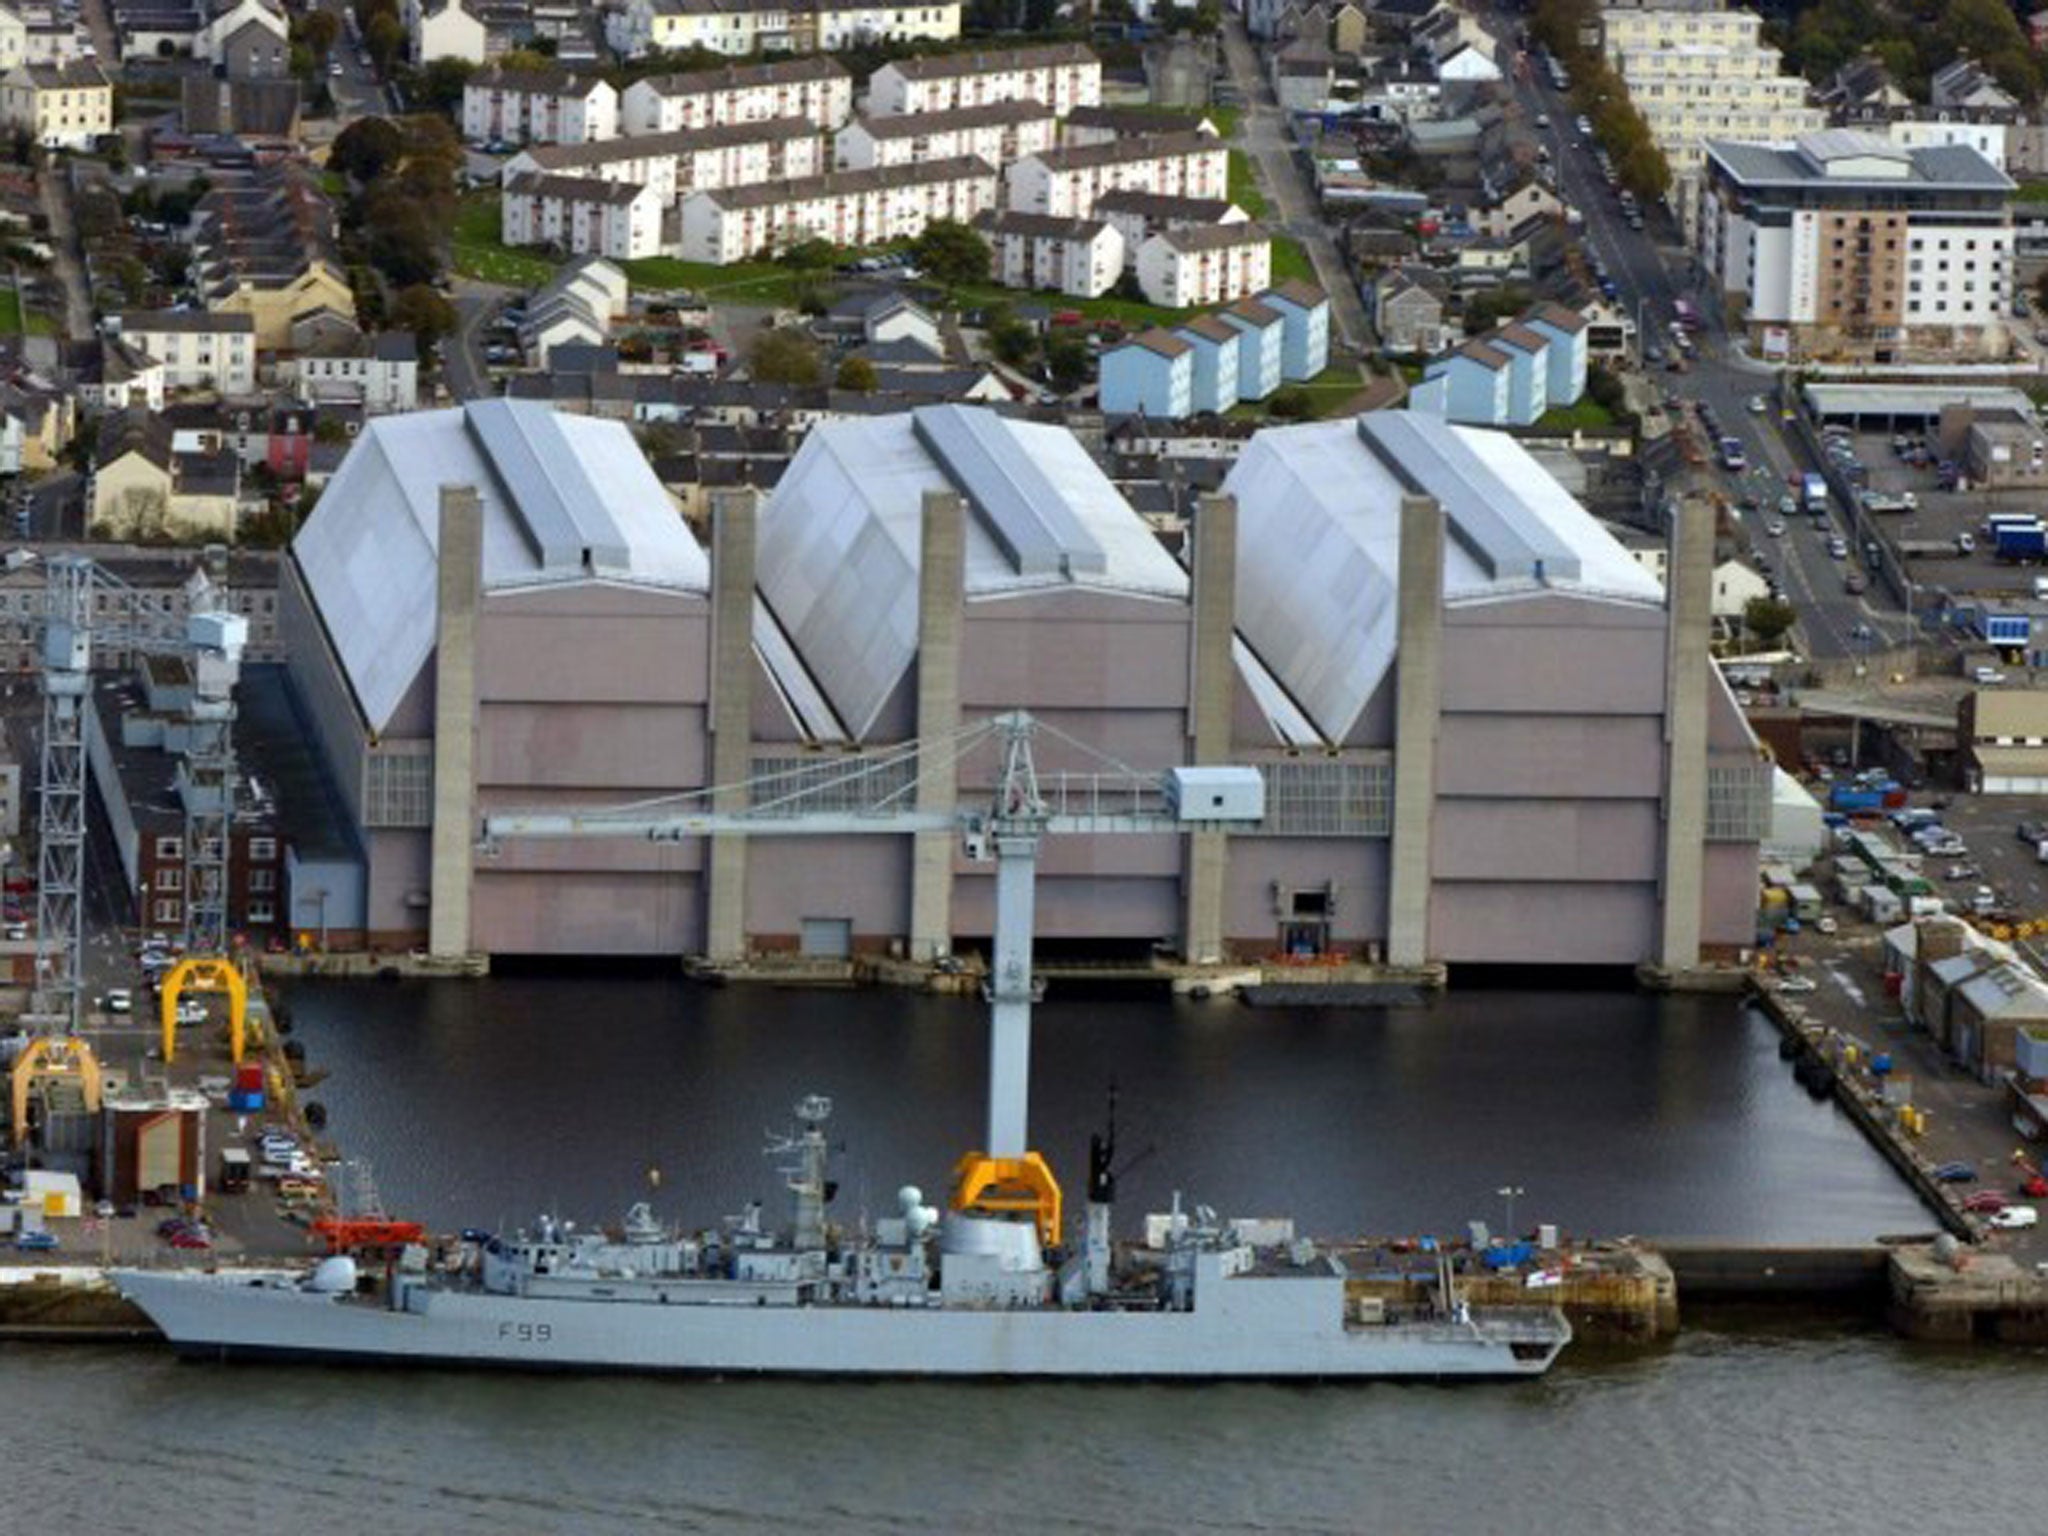 Devonport dockyard, Plymouth, repairs and refuels Royal Navy nuclear submarines